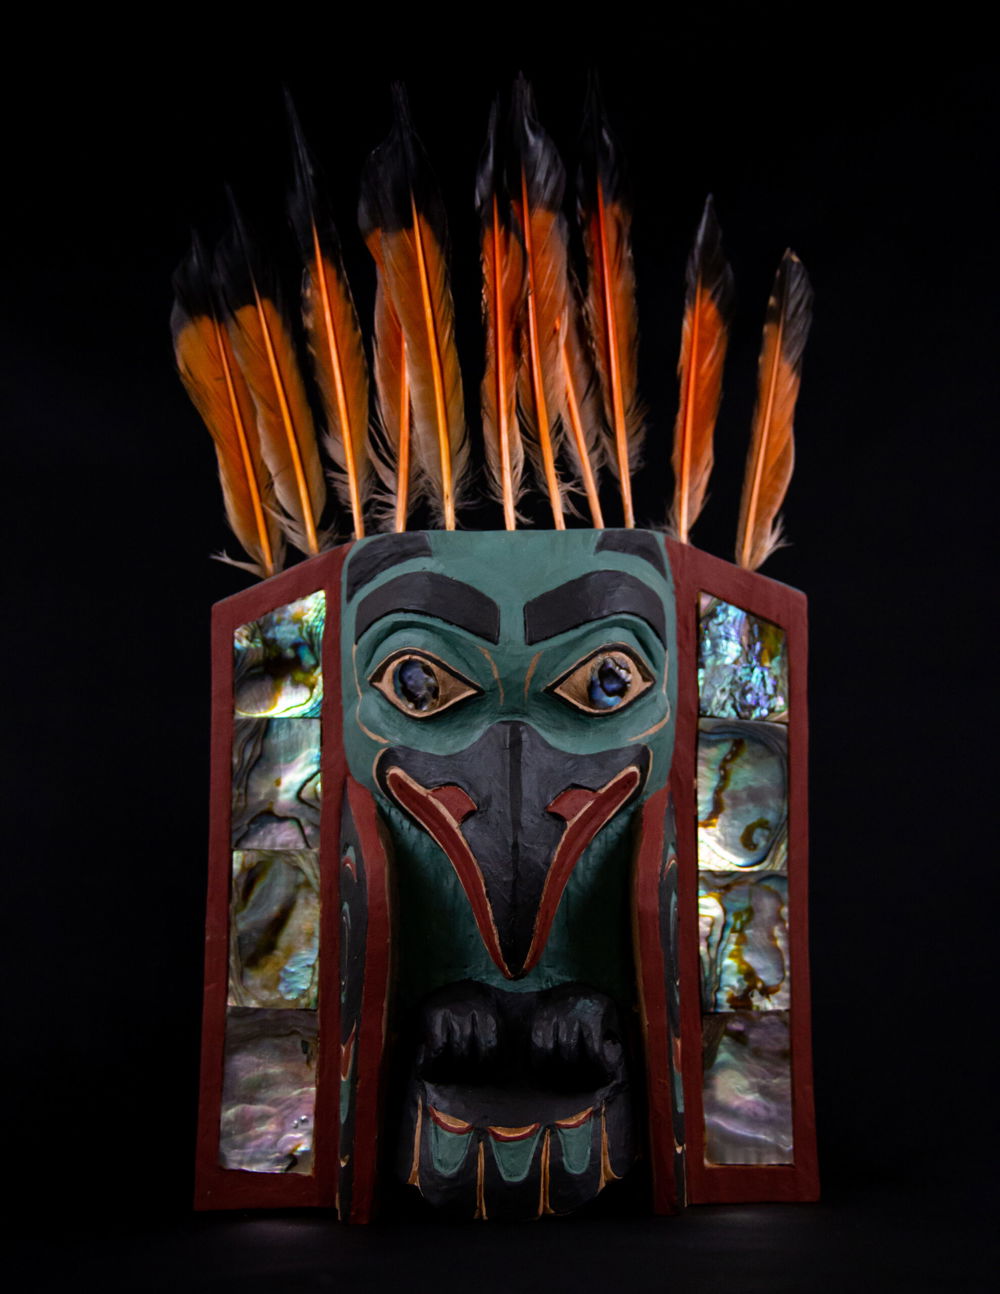 A raven headdress frontlet traditionally put on the front of an ermine skin headdress. It represents a raven, one of the main moieties in Northwest coast culture. The raven’s head, claws, tails, and wings are compacted together in the center and surrounded by abalone inlay on either side, with orange and black-tipped flicker feathers attached to the top of the frontlet.]